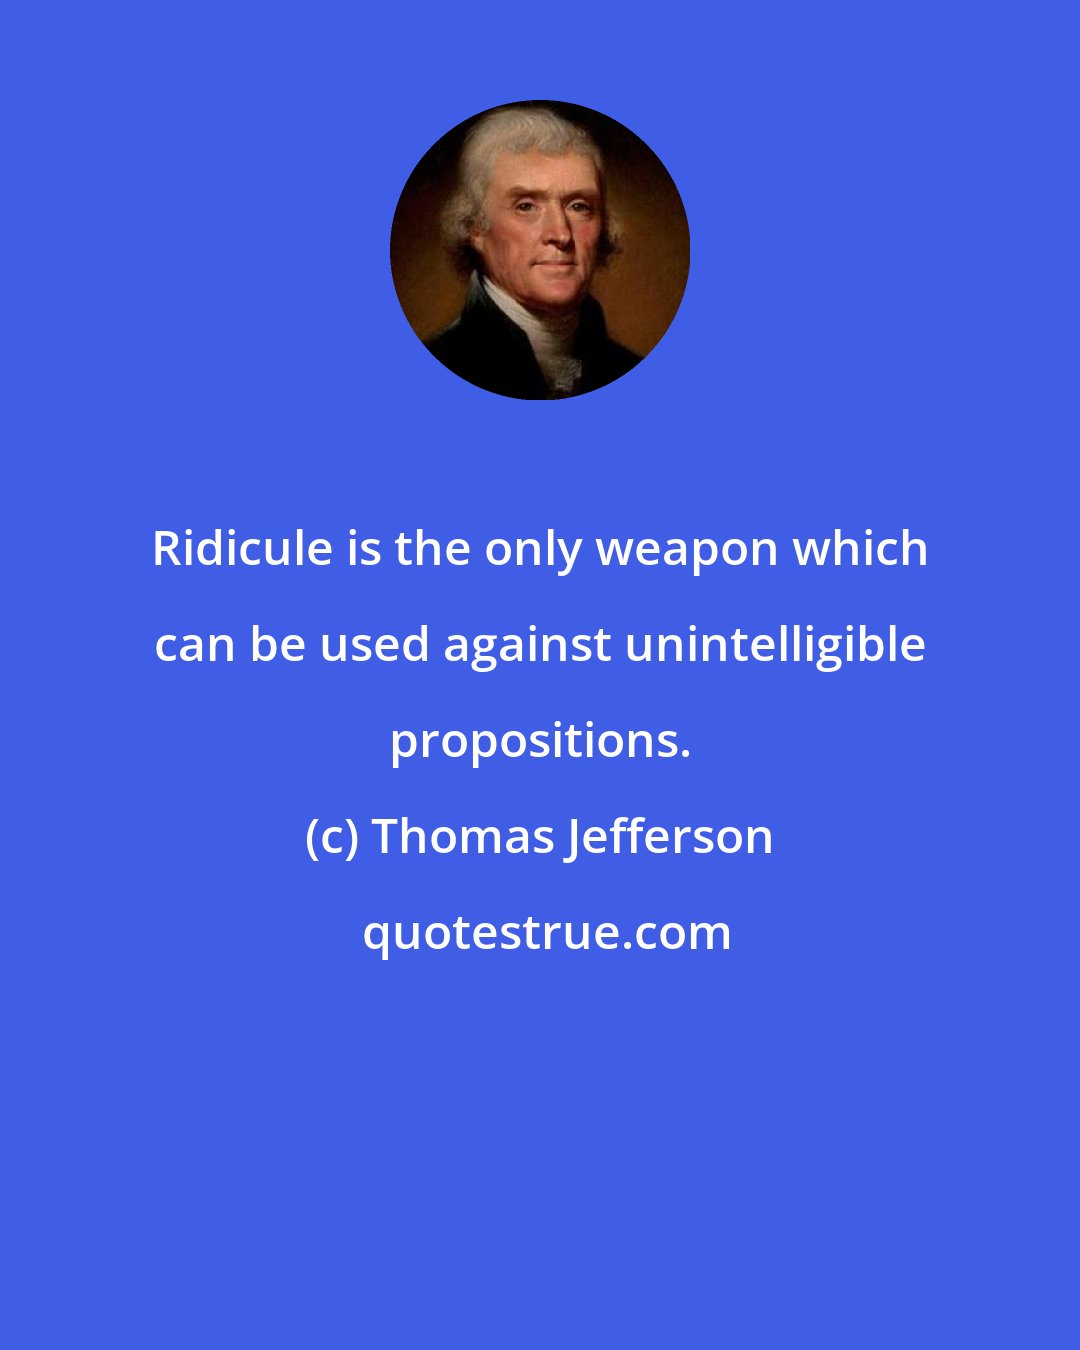 Thomas Jefferson: Ridicule is the only weapon which can be used against unintelligible propositions.